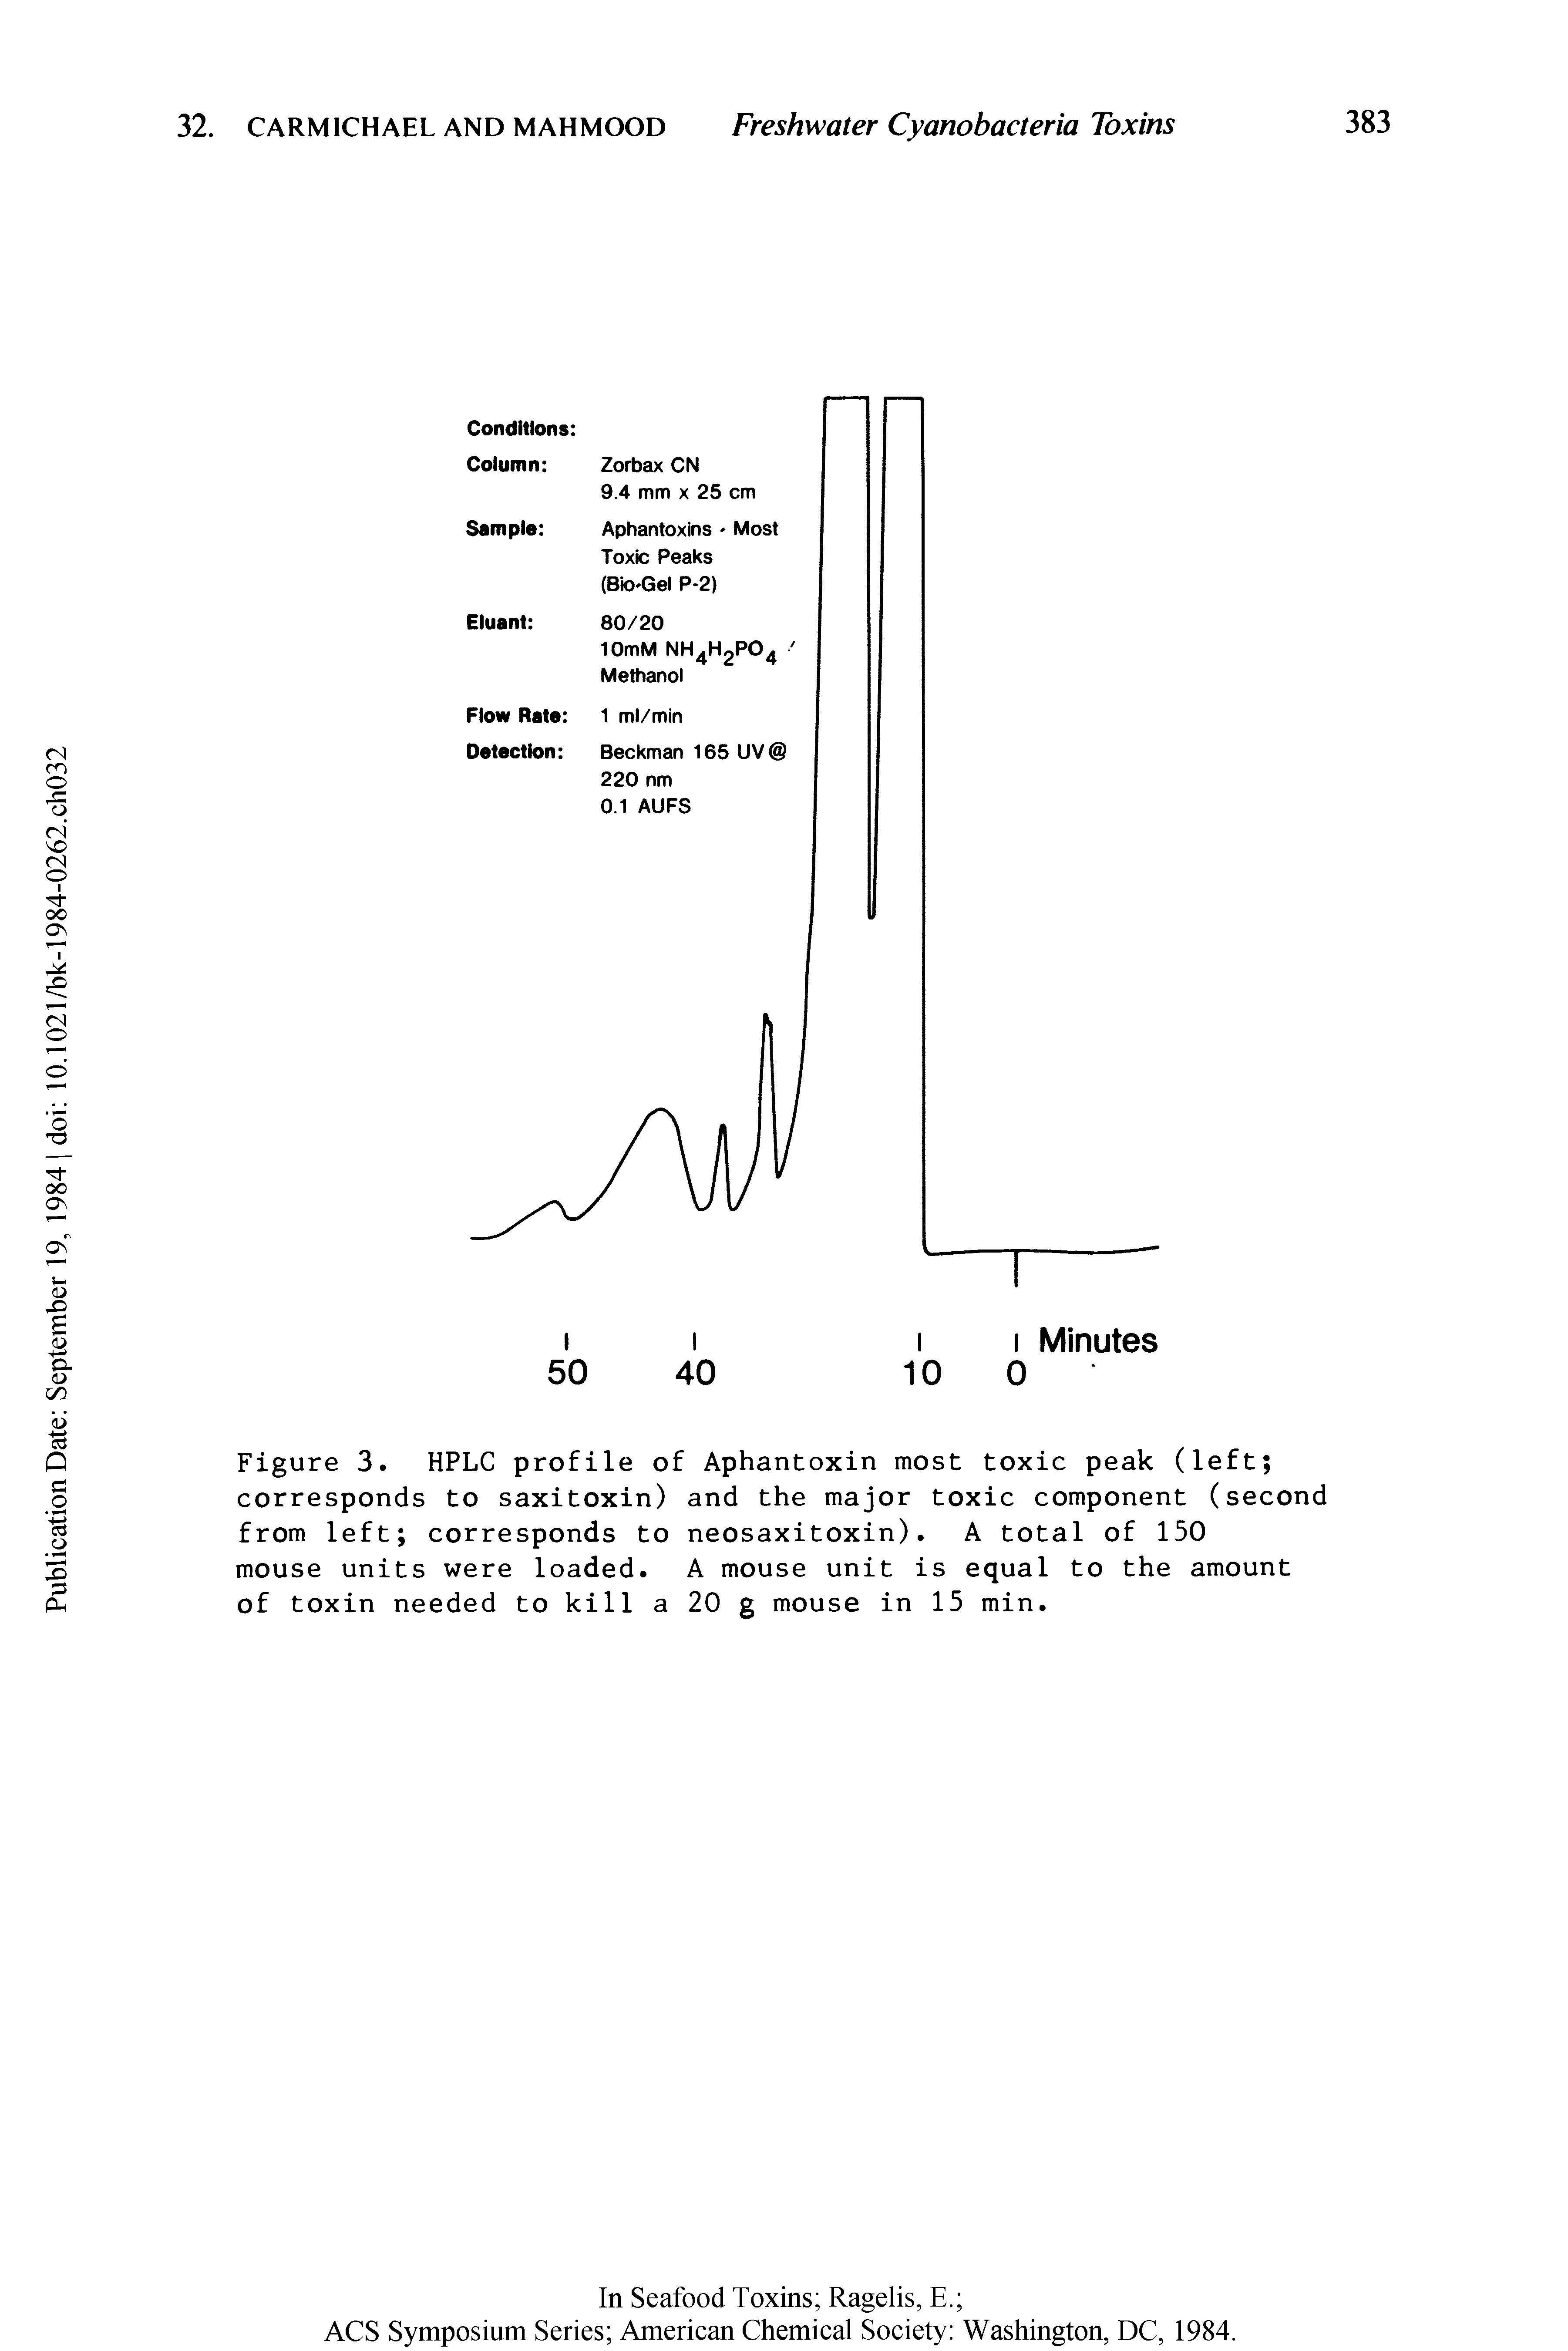 Figure 3. HPLC profile of Aphantoxin most toxic peak (left corresponds to saxitoxin) and the major toxic component (second from left corresponds to neosaxitoxin). A total of 150 mouse units were loaded. A mouse unit is equal to the amount of toxin needed to kill a 20 g mouse in 15 min.